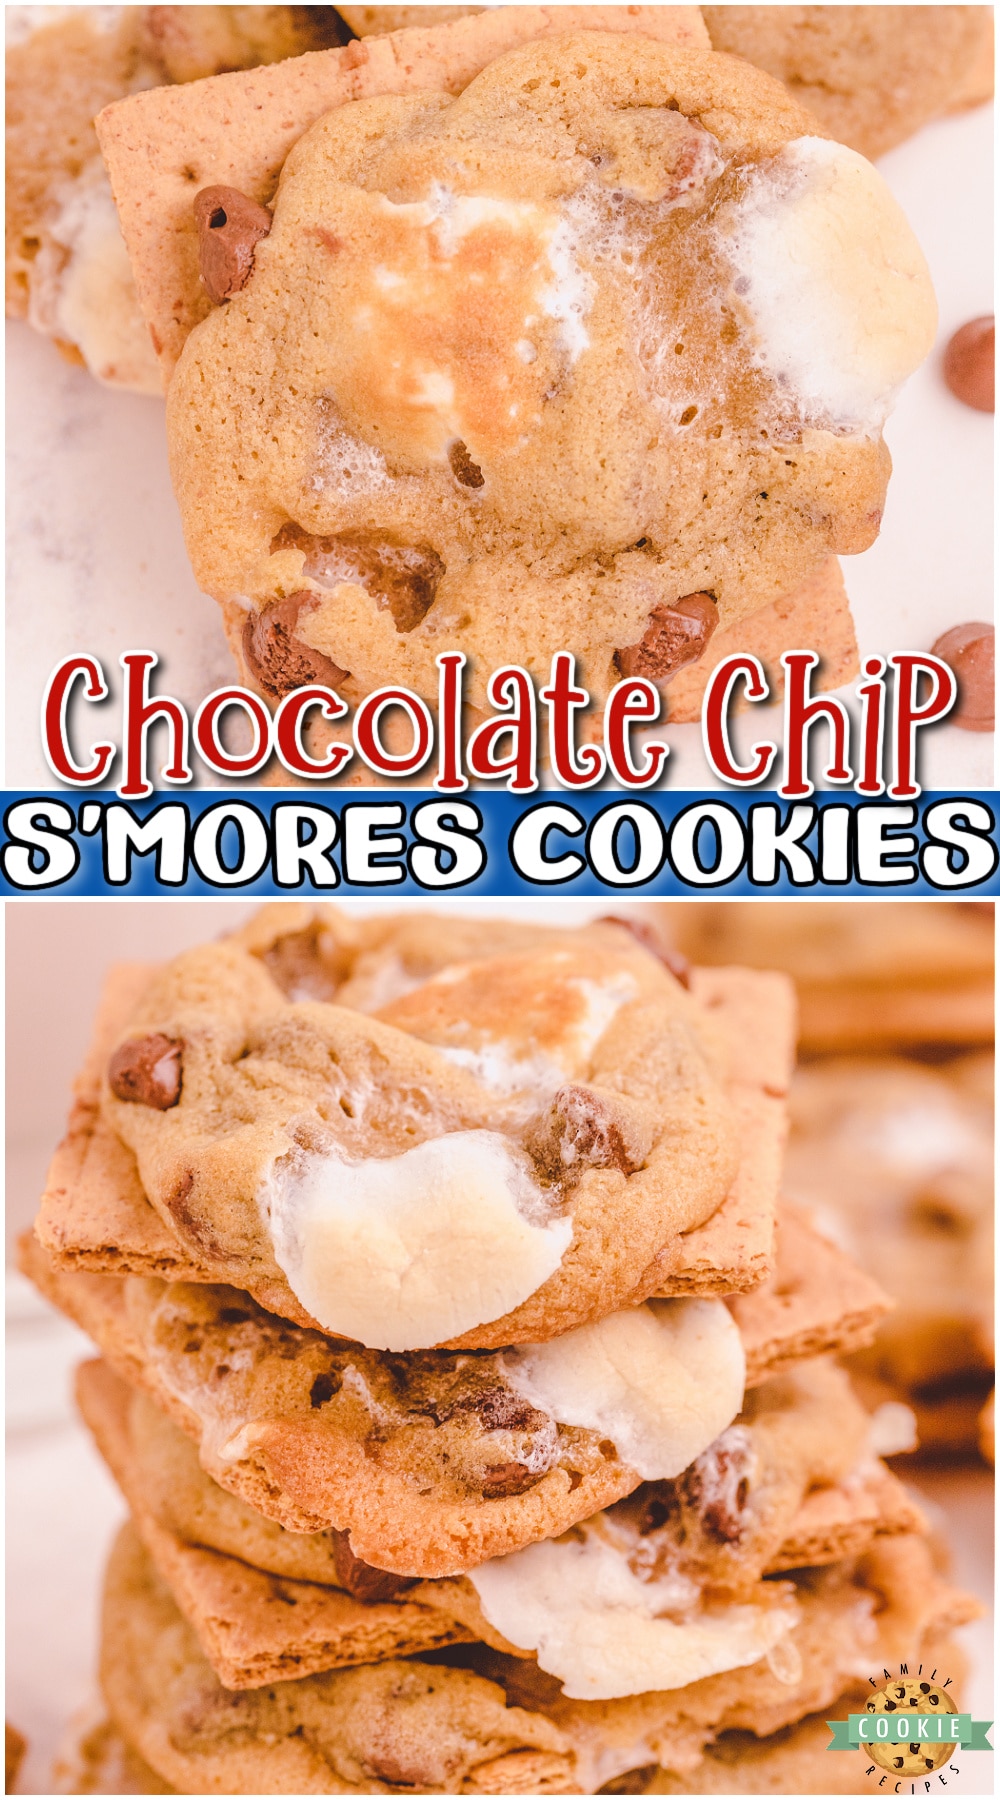 Chocolate Chip S’mores Cookies are soft, chewy chocolate chip cookies baked atop a graham cracker, then topped with chocolate chips & marshmallows!  via @buttergirls